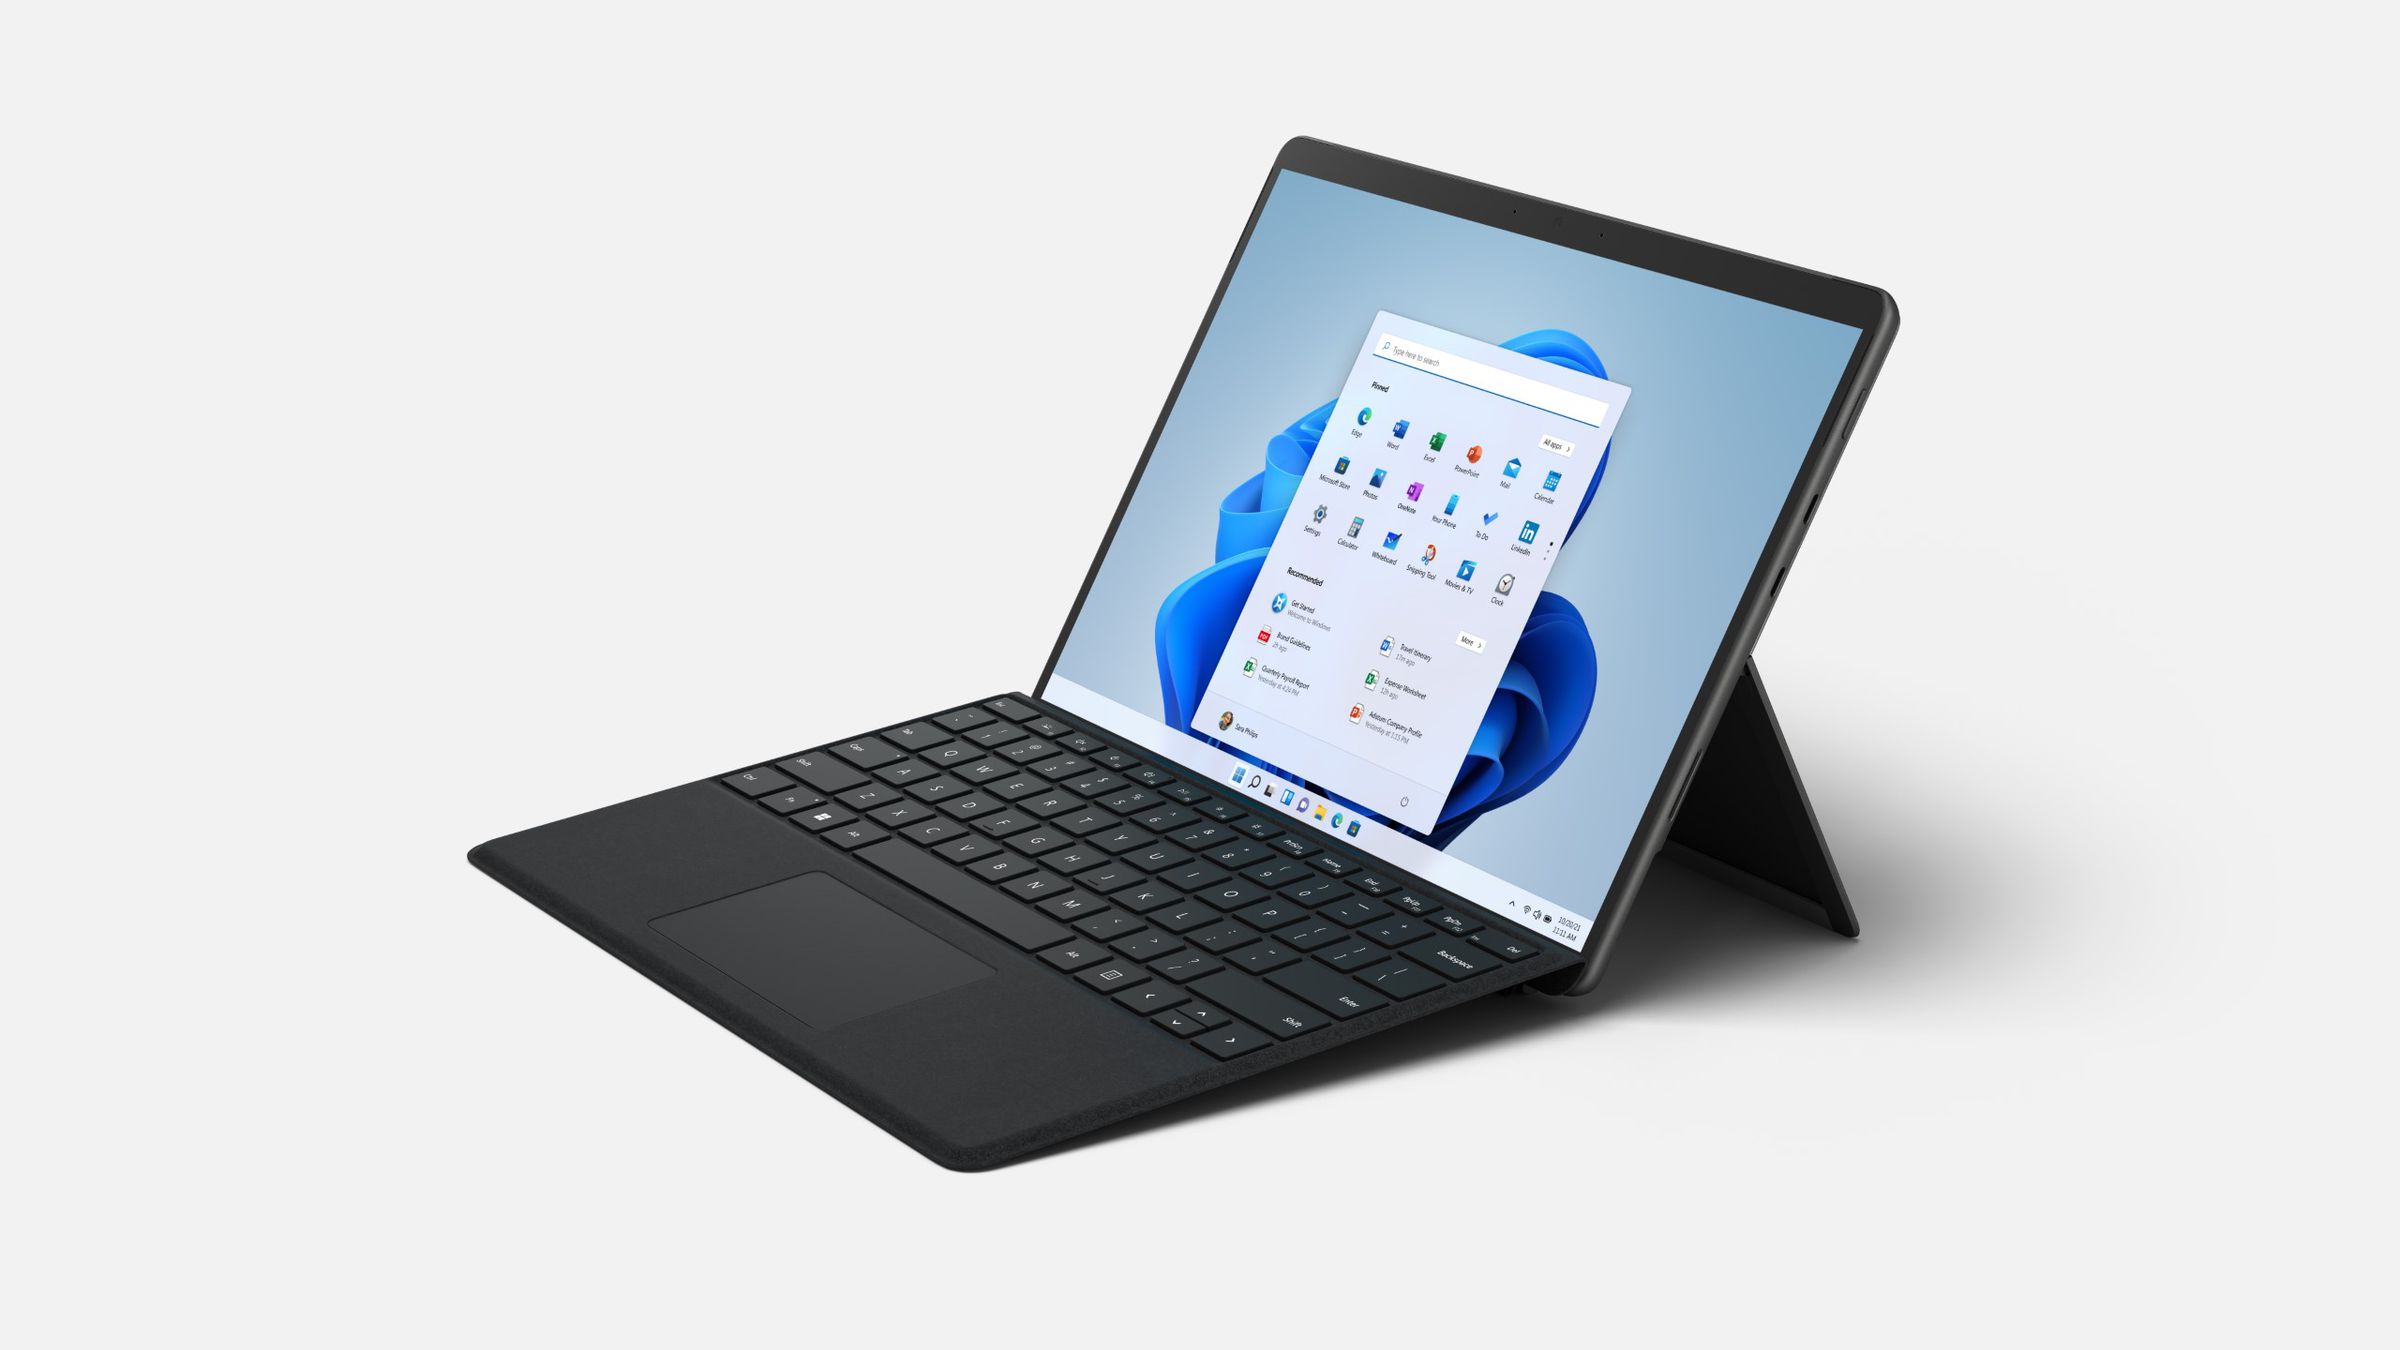 The Surface Pro 8 is equipped with a larger, 13-inch touchscreen and narrower bezels.